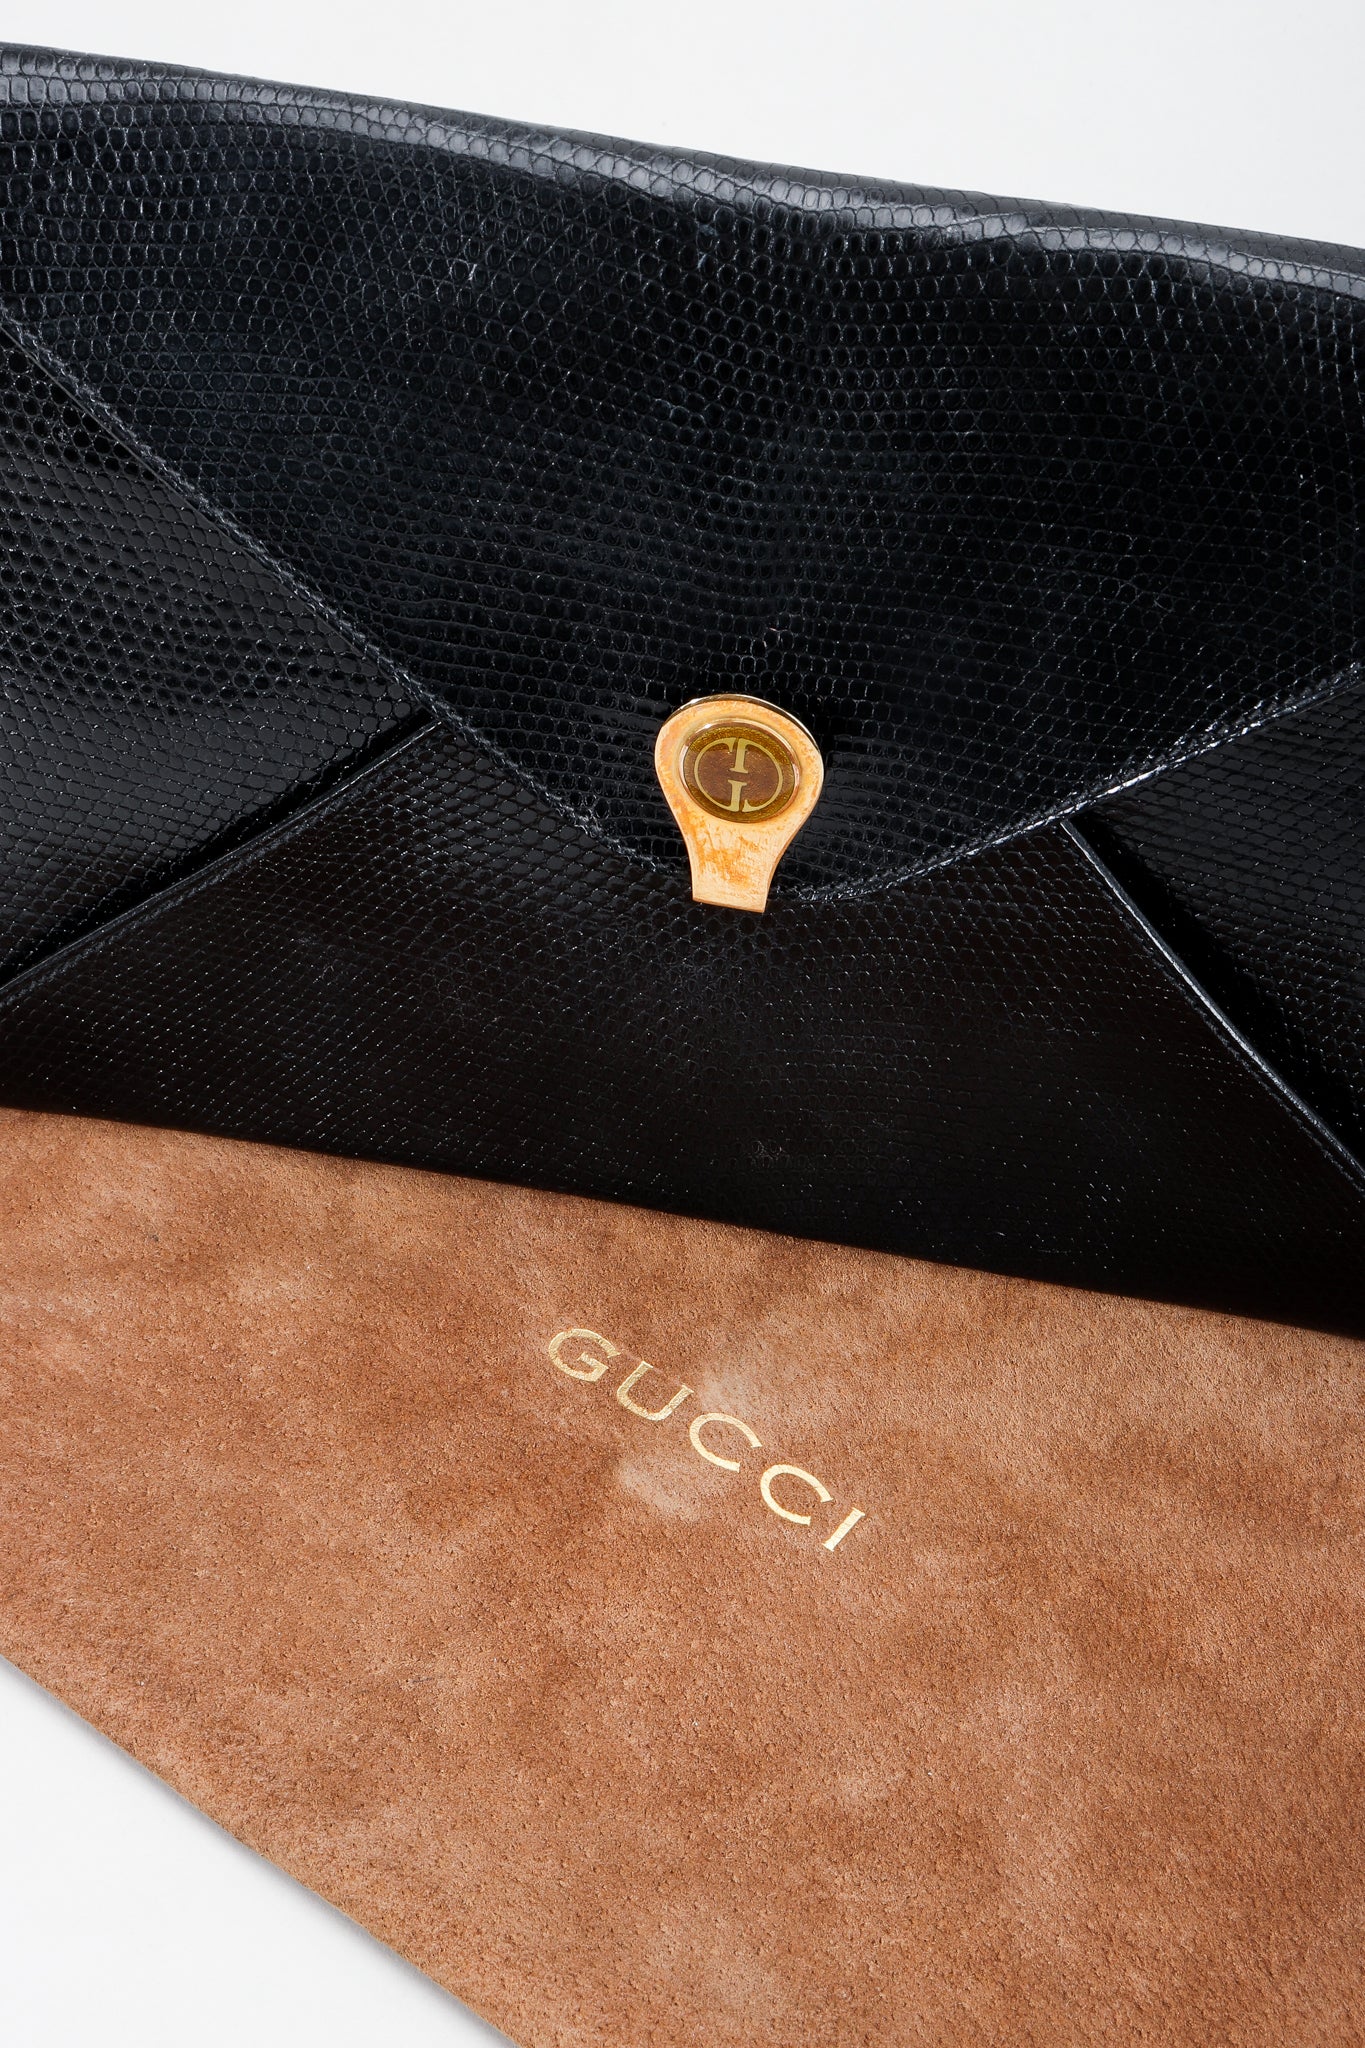 Vintage Gucci Lizard Leather Envelope Clutch at Recess Los Angeles